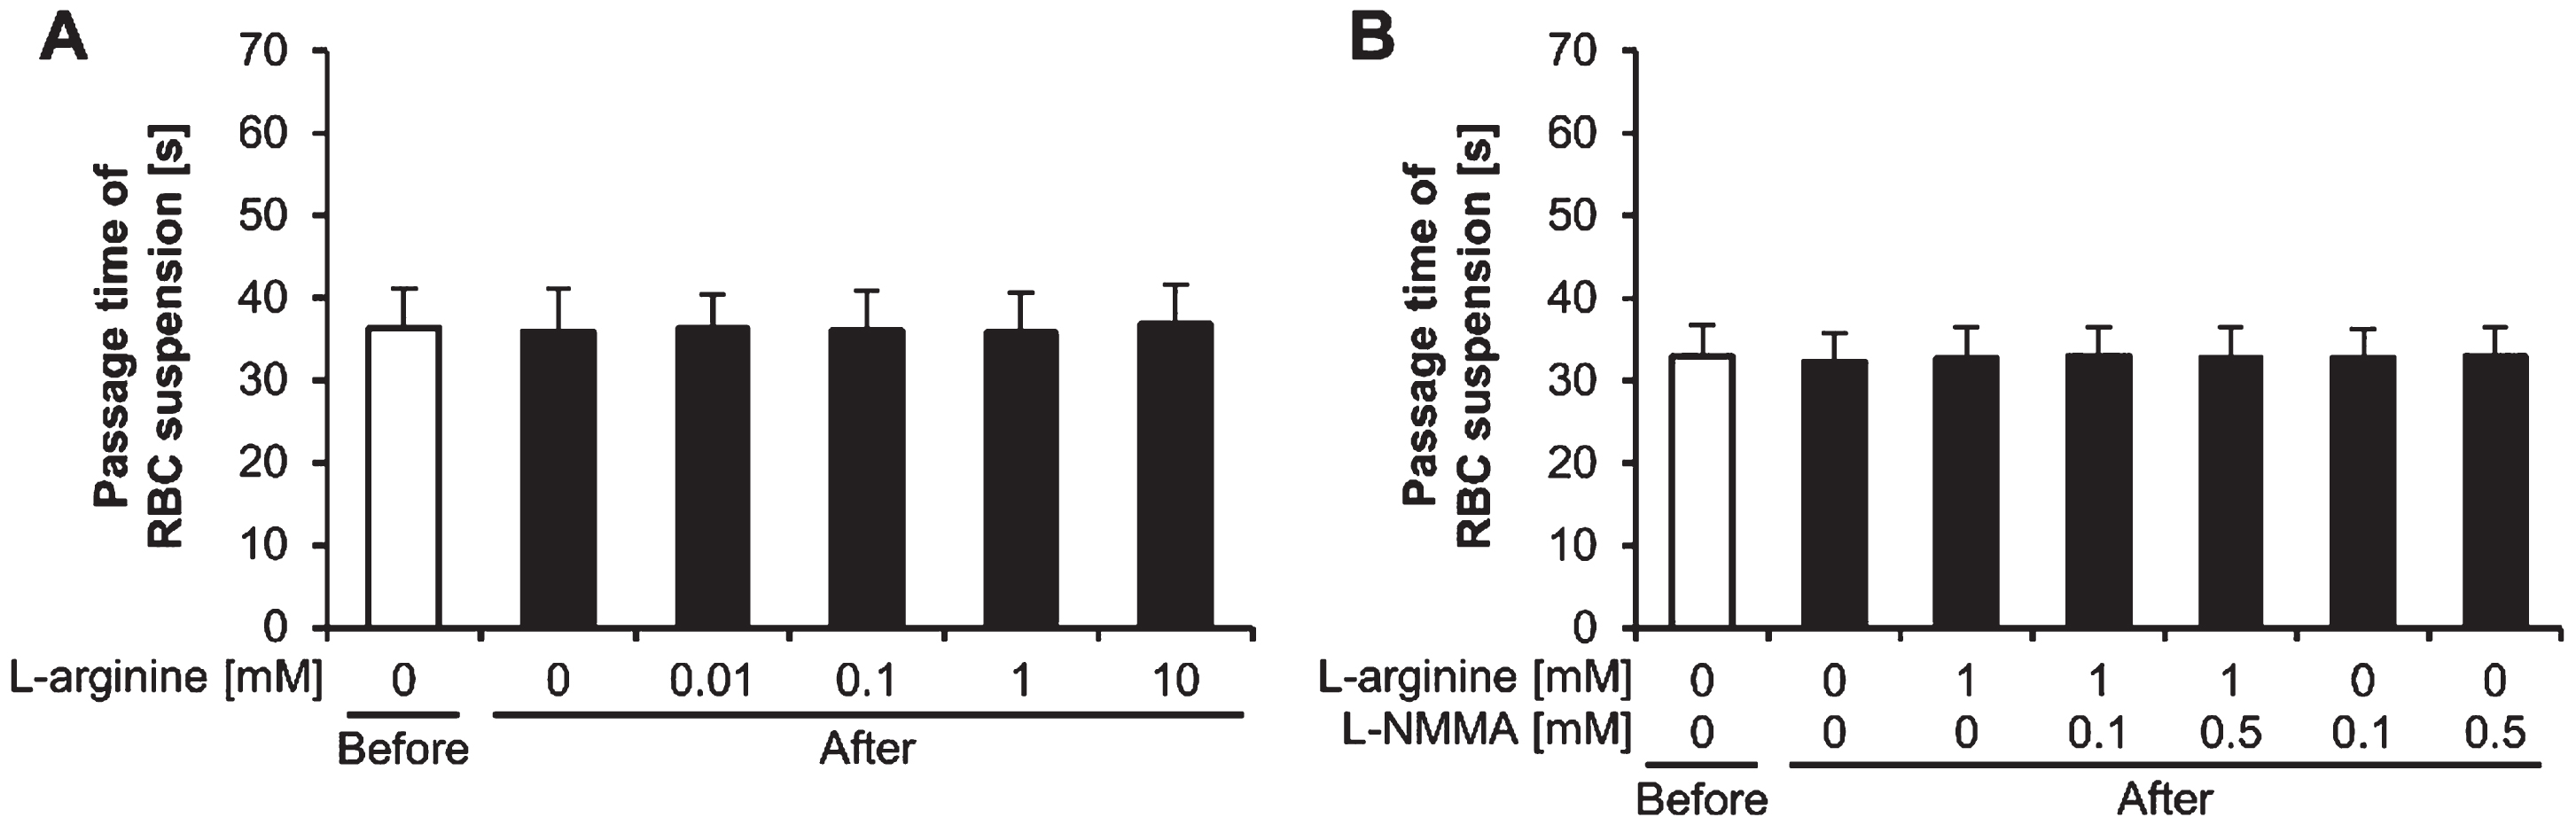 Passage times of red blood cell suspensions. Passage times of red blood cell (RBC) suspensions (A) treated with L-arginine and (B) treated with L-arginine and L-NMMA, before and after exercise. L-NMMA: NG-monomethyl-L-arginine acetate; Before: before exercise; After: after exercise.